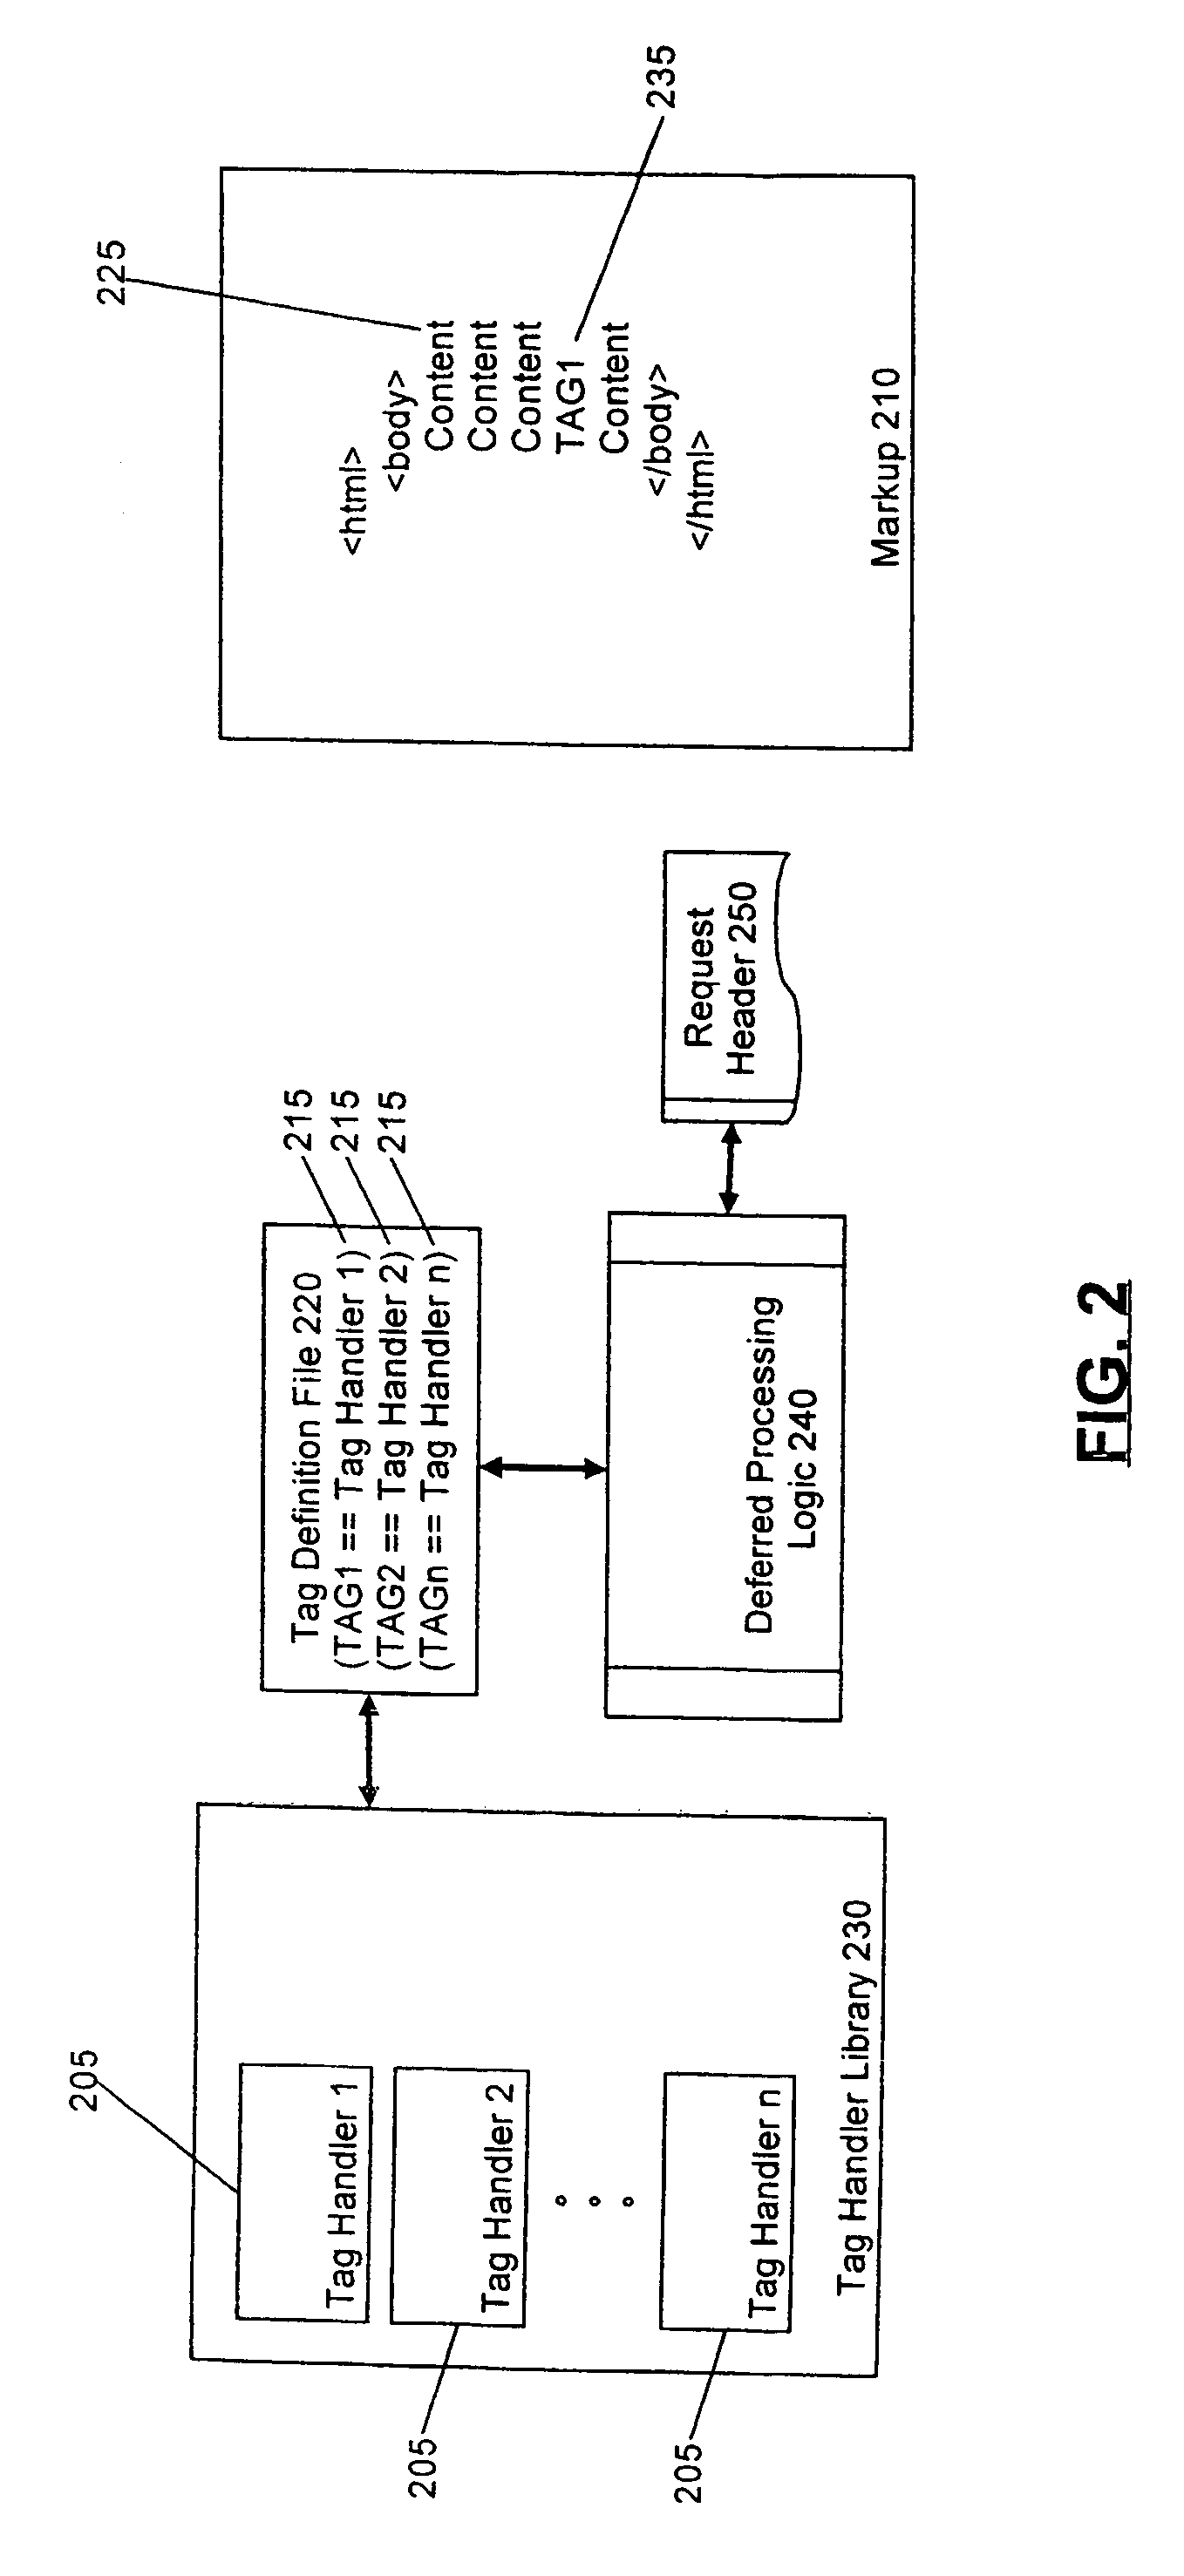 Selectively handling data processing requests in a computer communications network